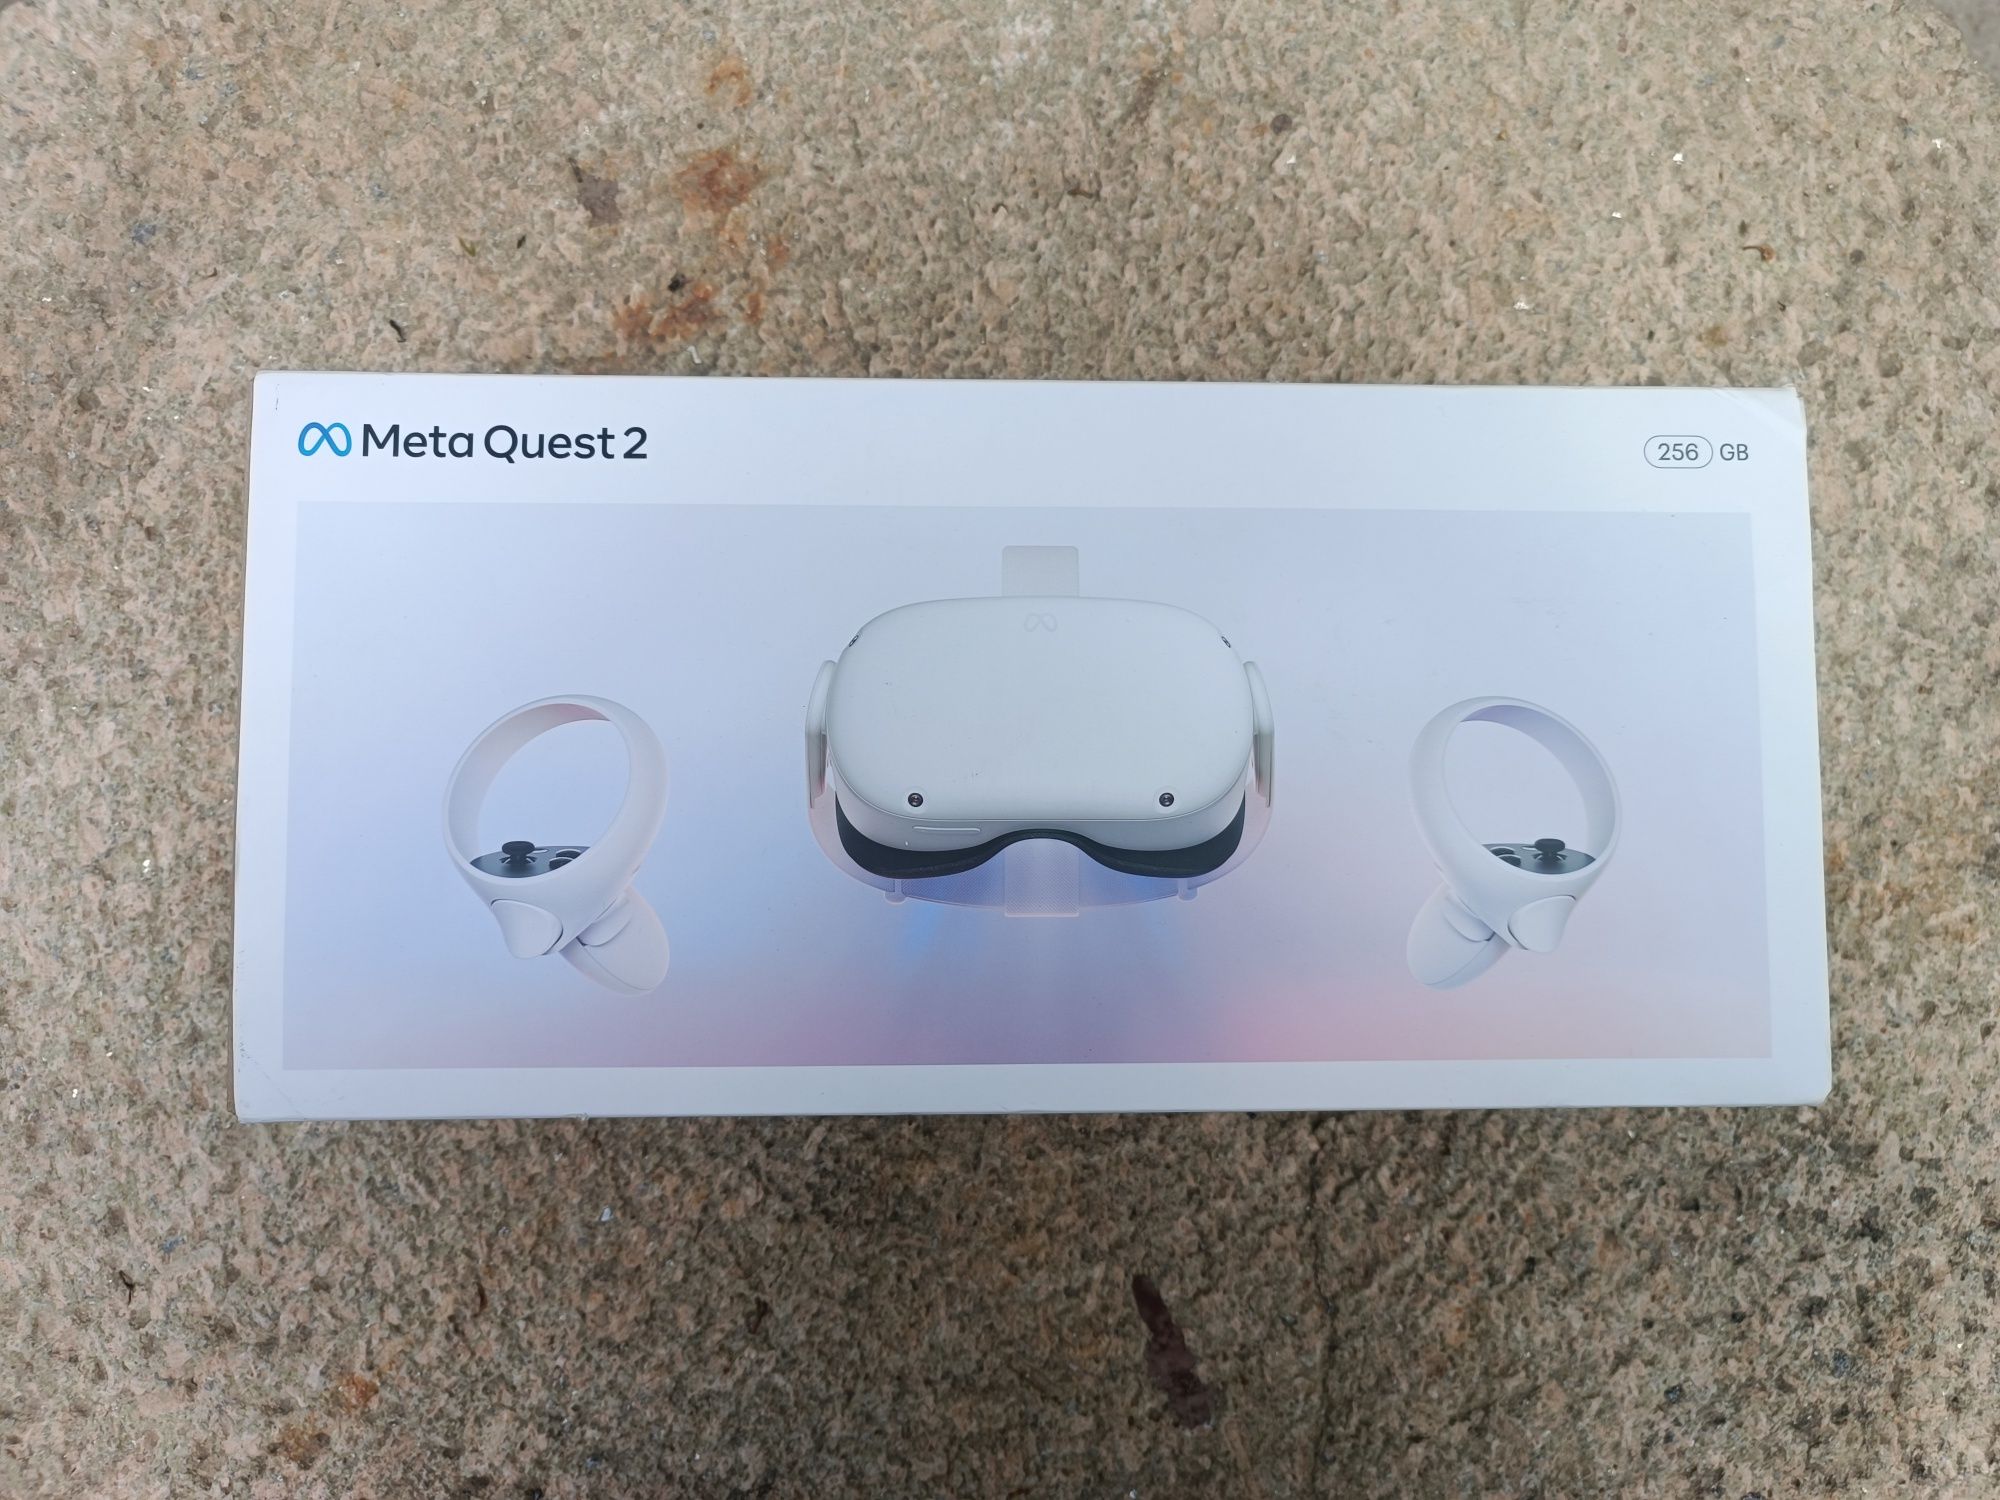 Oculus Meta Quest 2 [256 GB] + Syntech Cable Link 5m